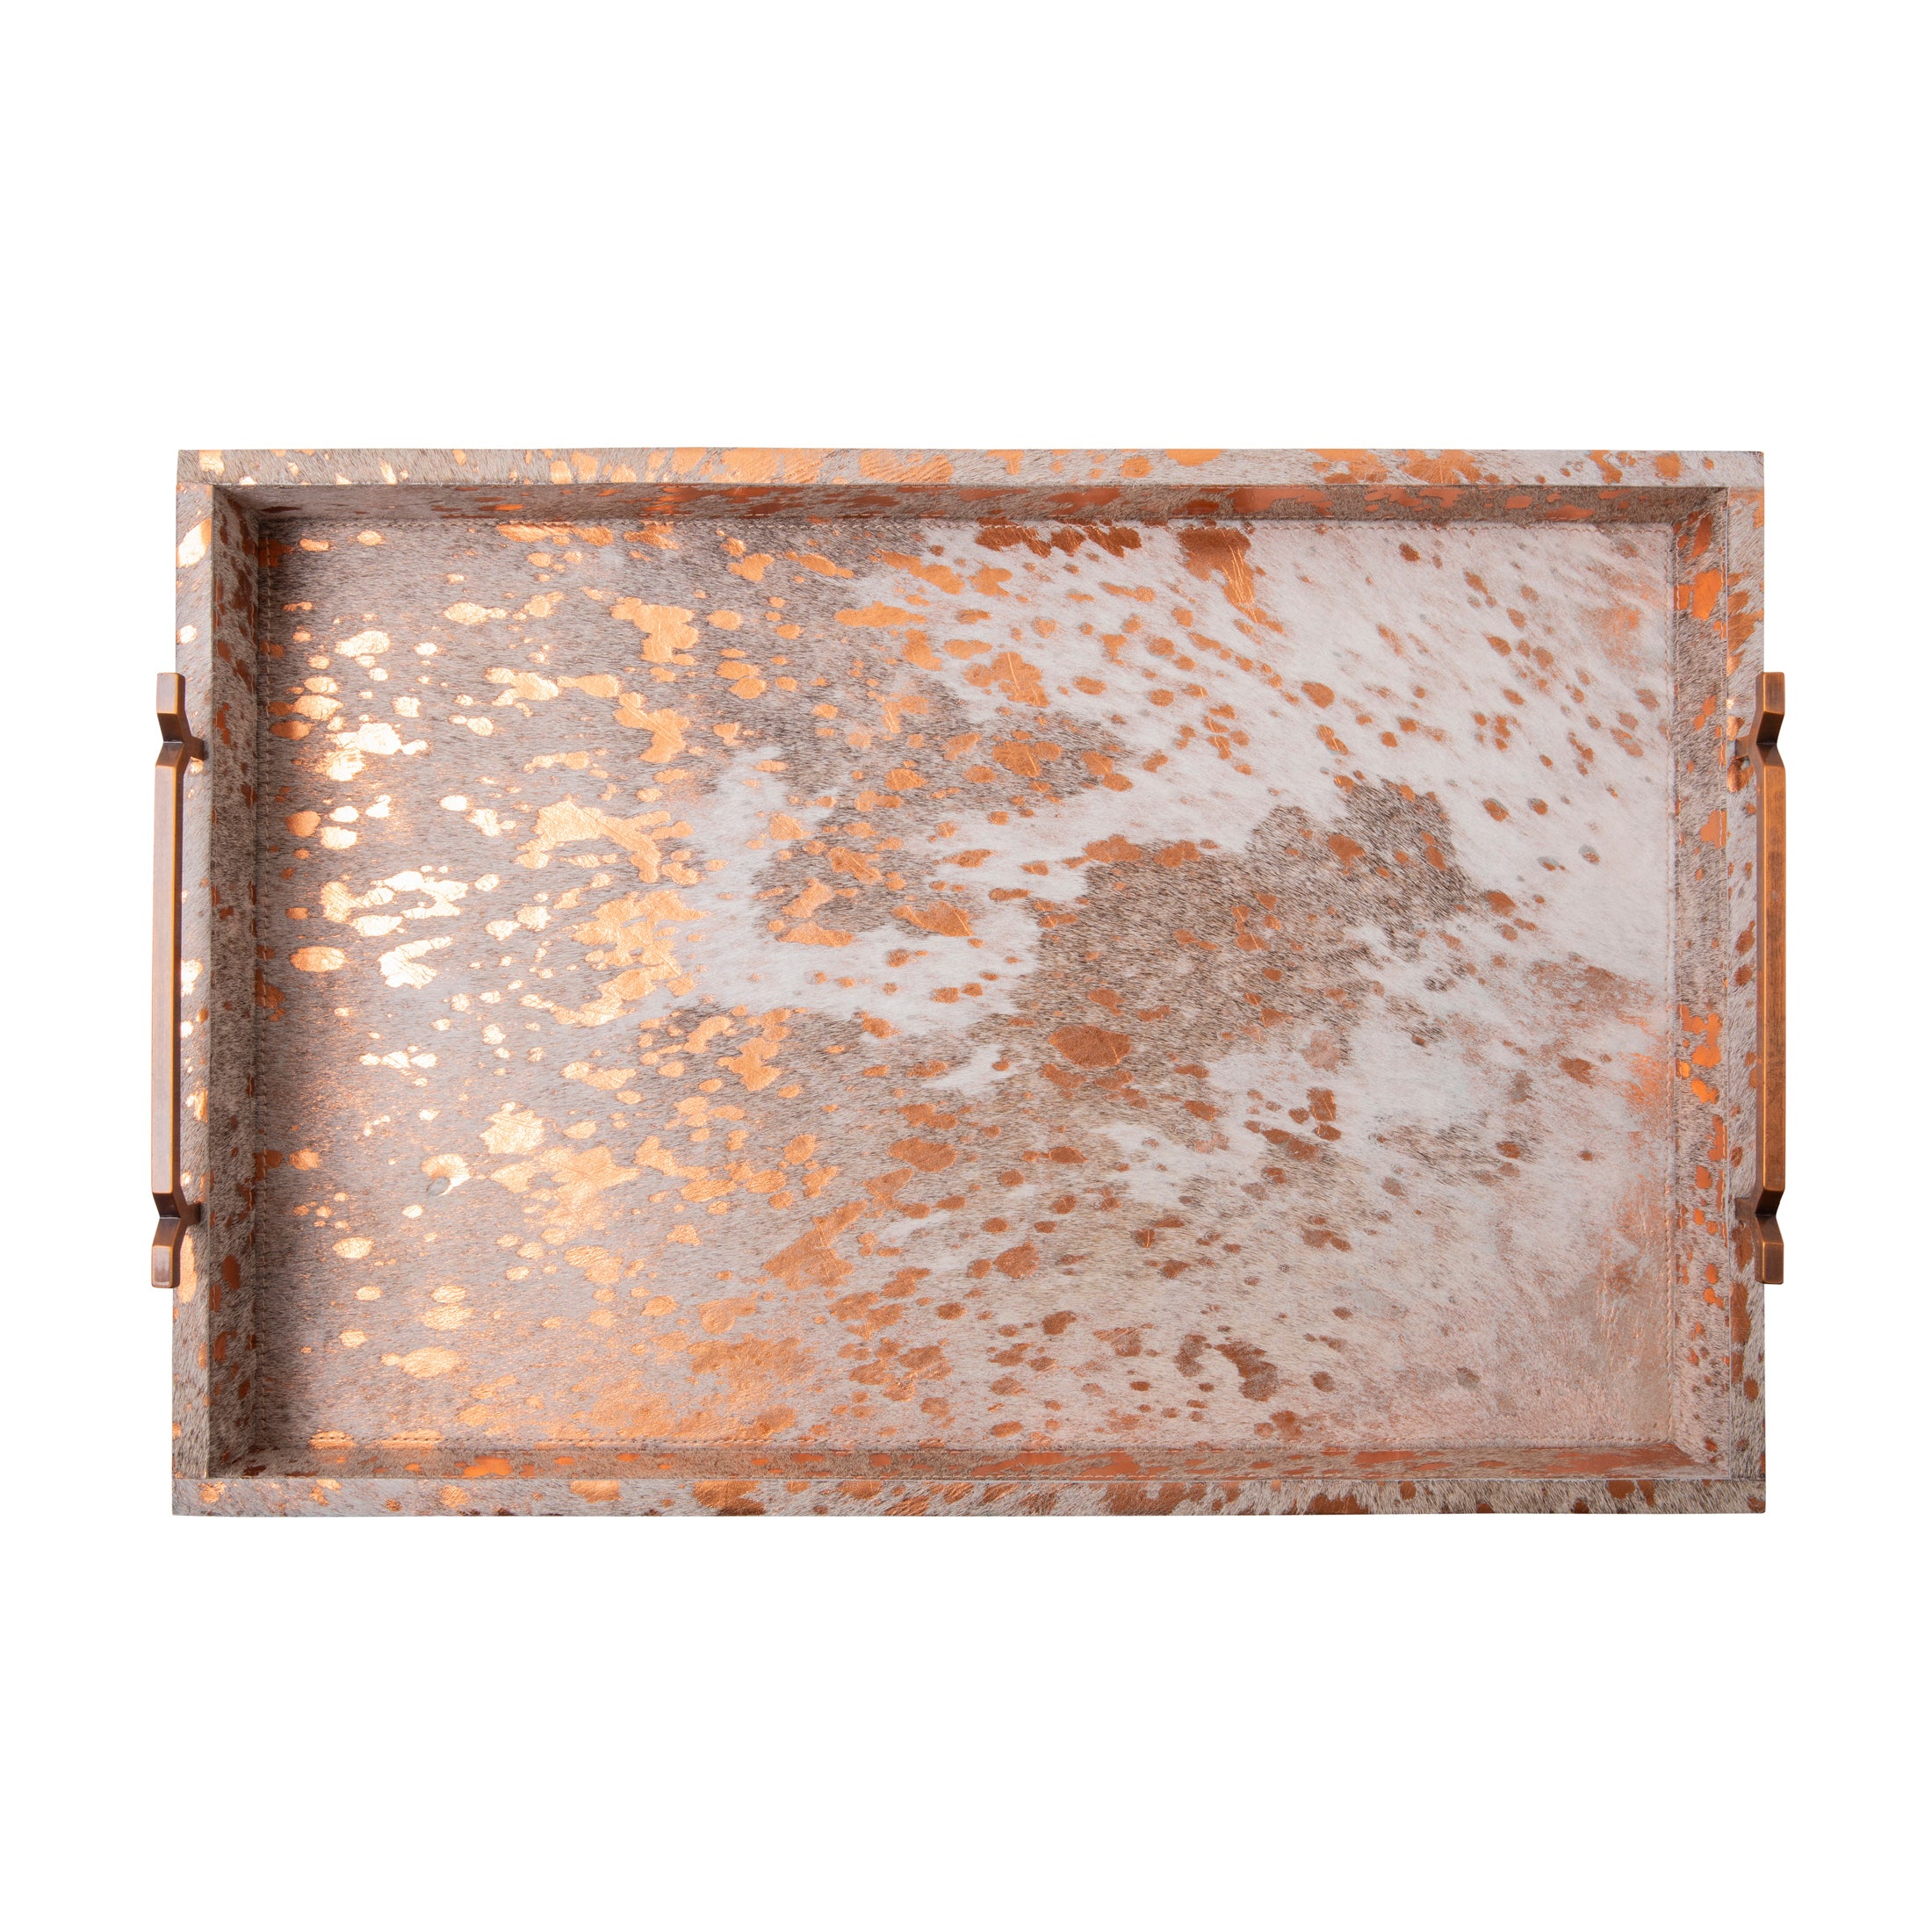 Metallic Copper Cow Hide Tray - Large